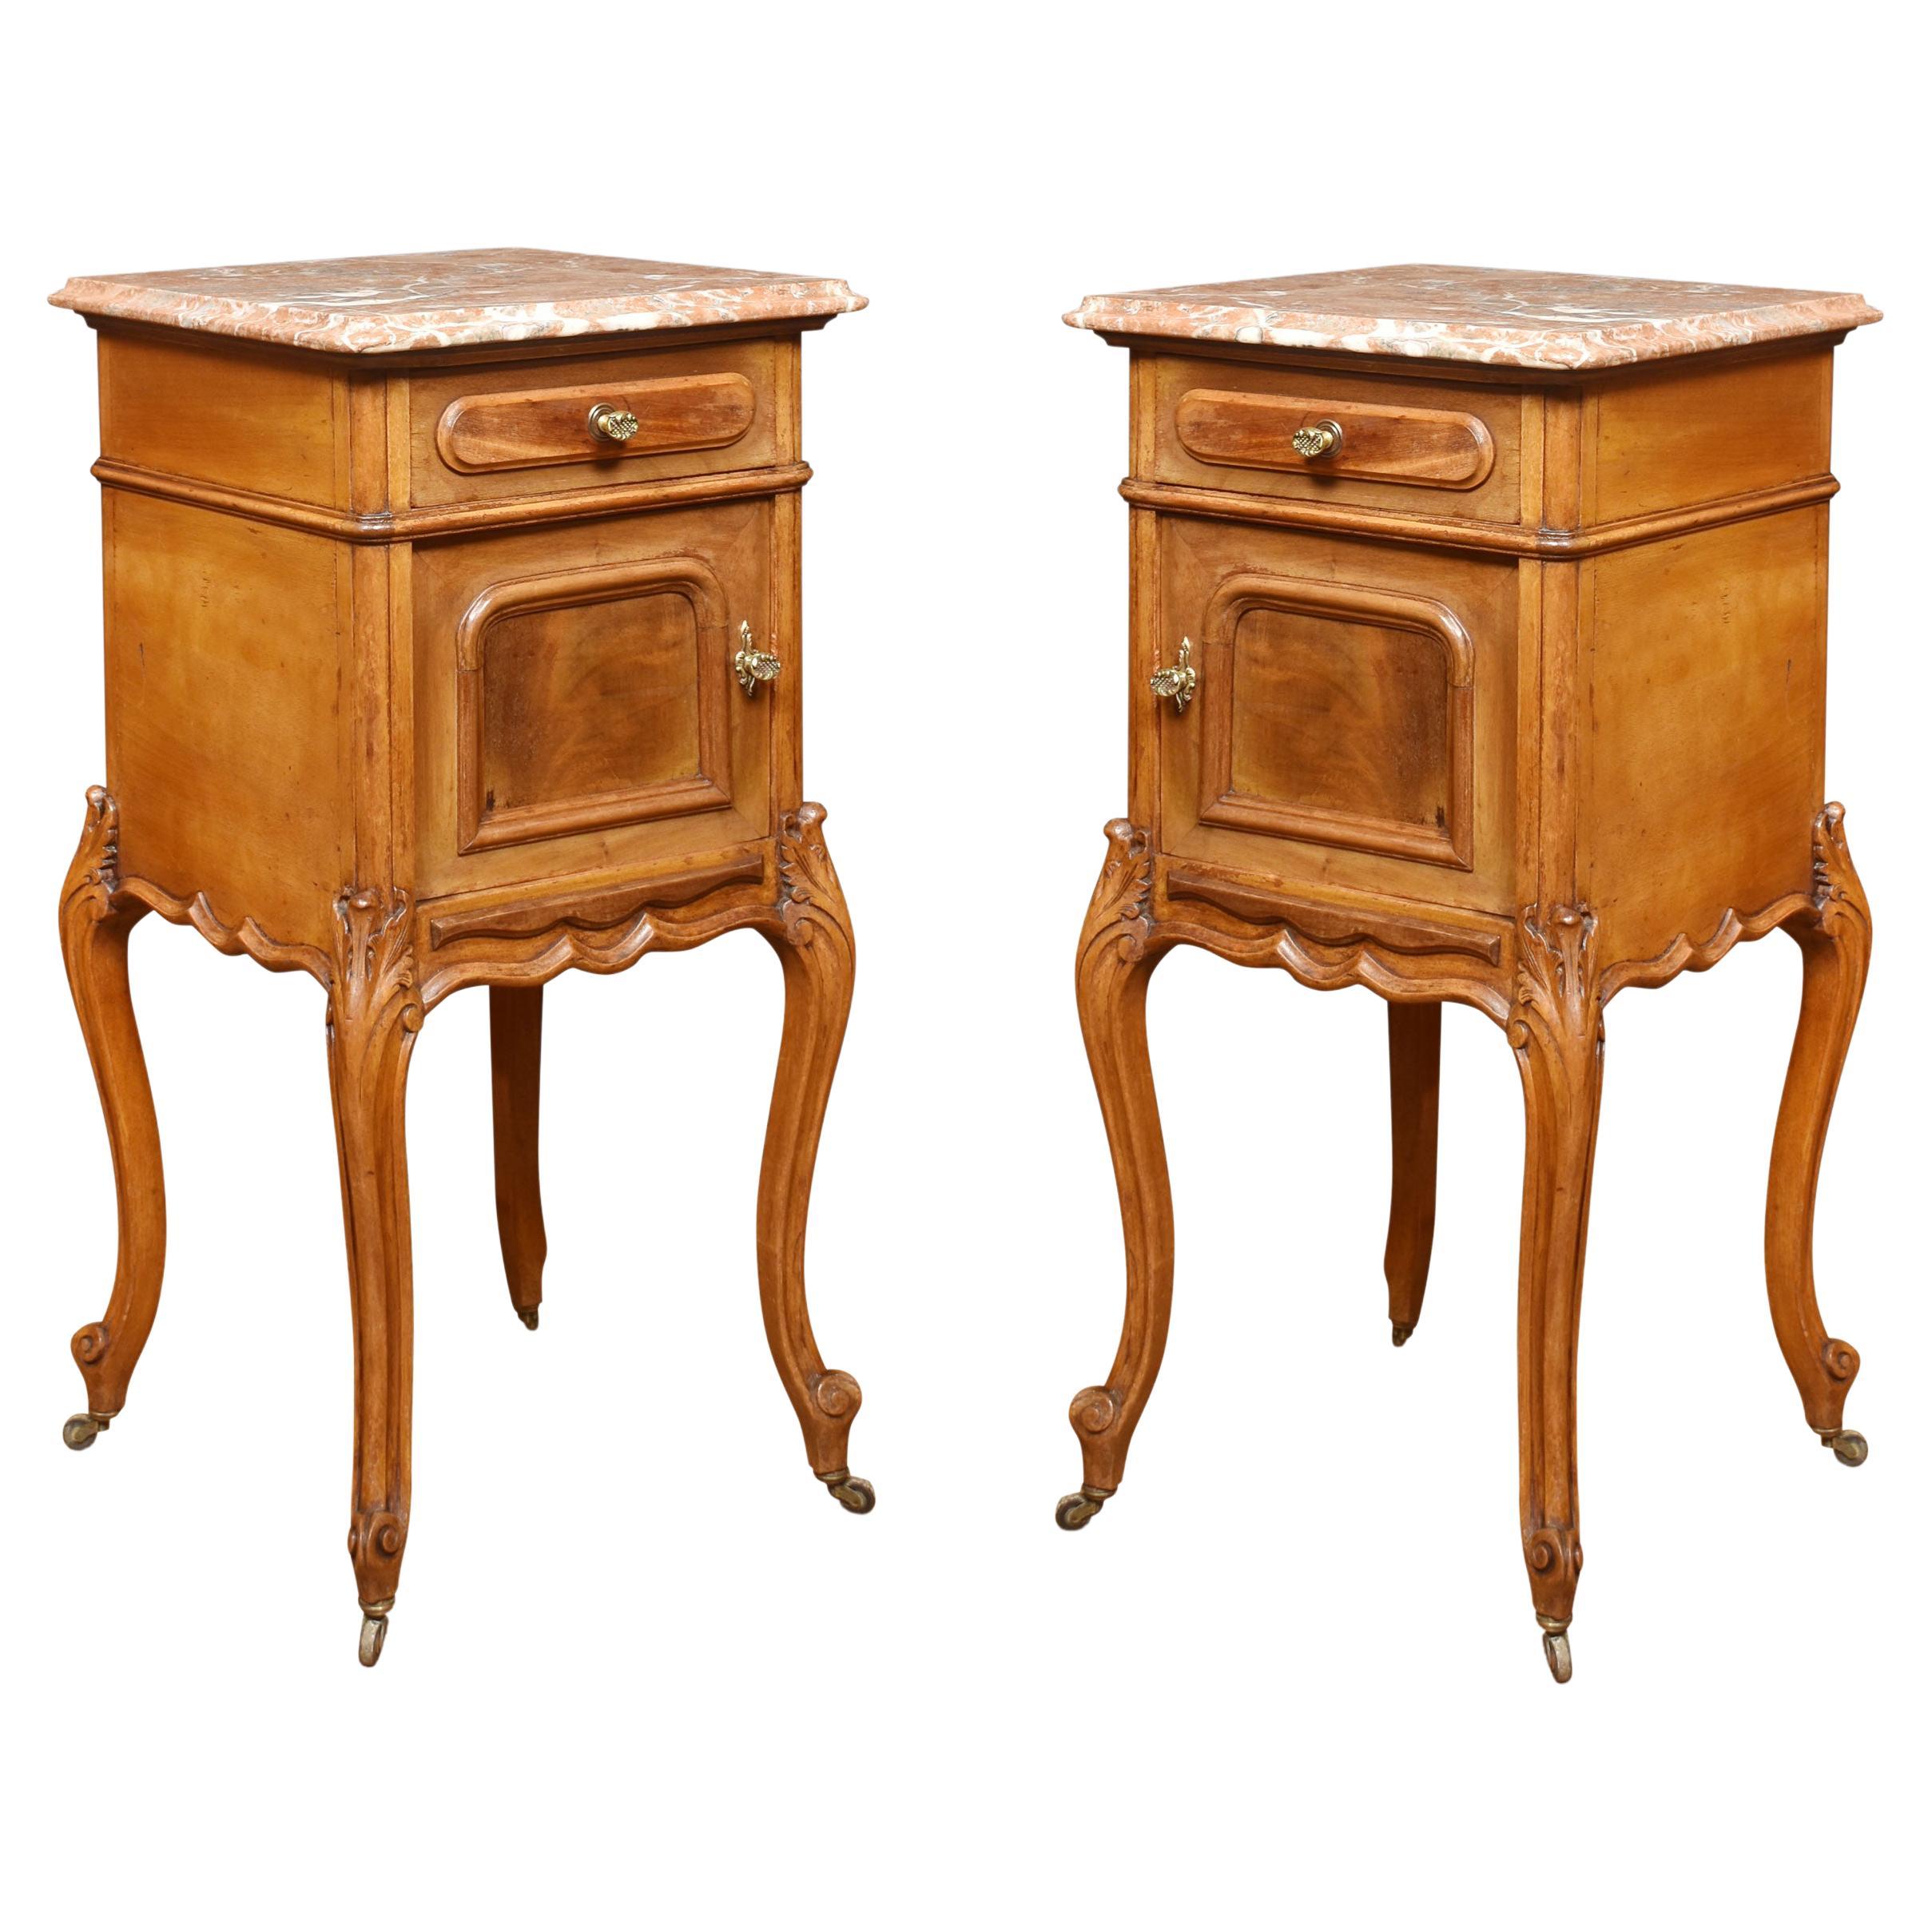 Pair of Walnut Marble Top Bedside Cabinets